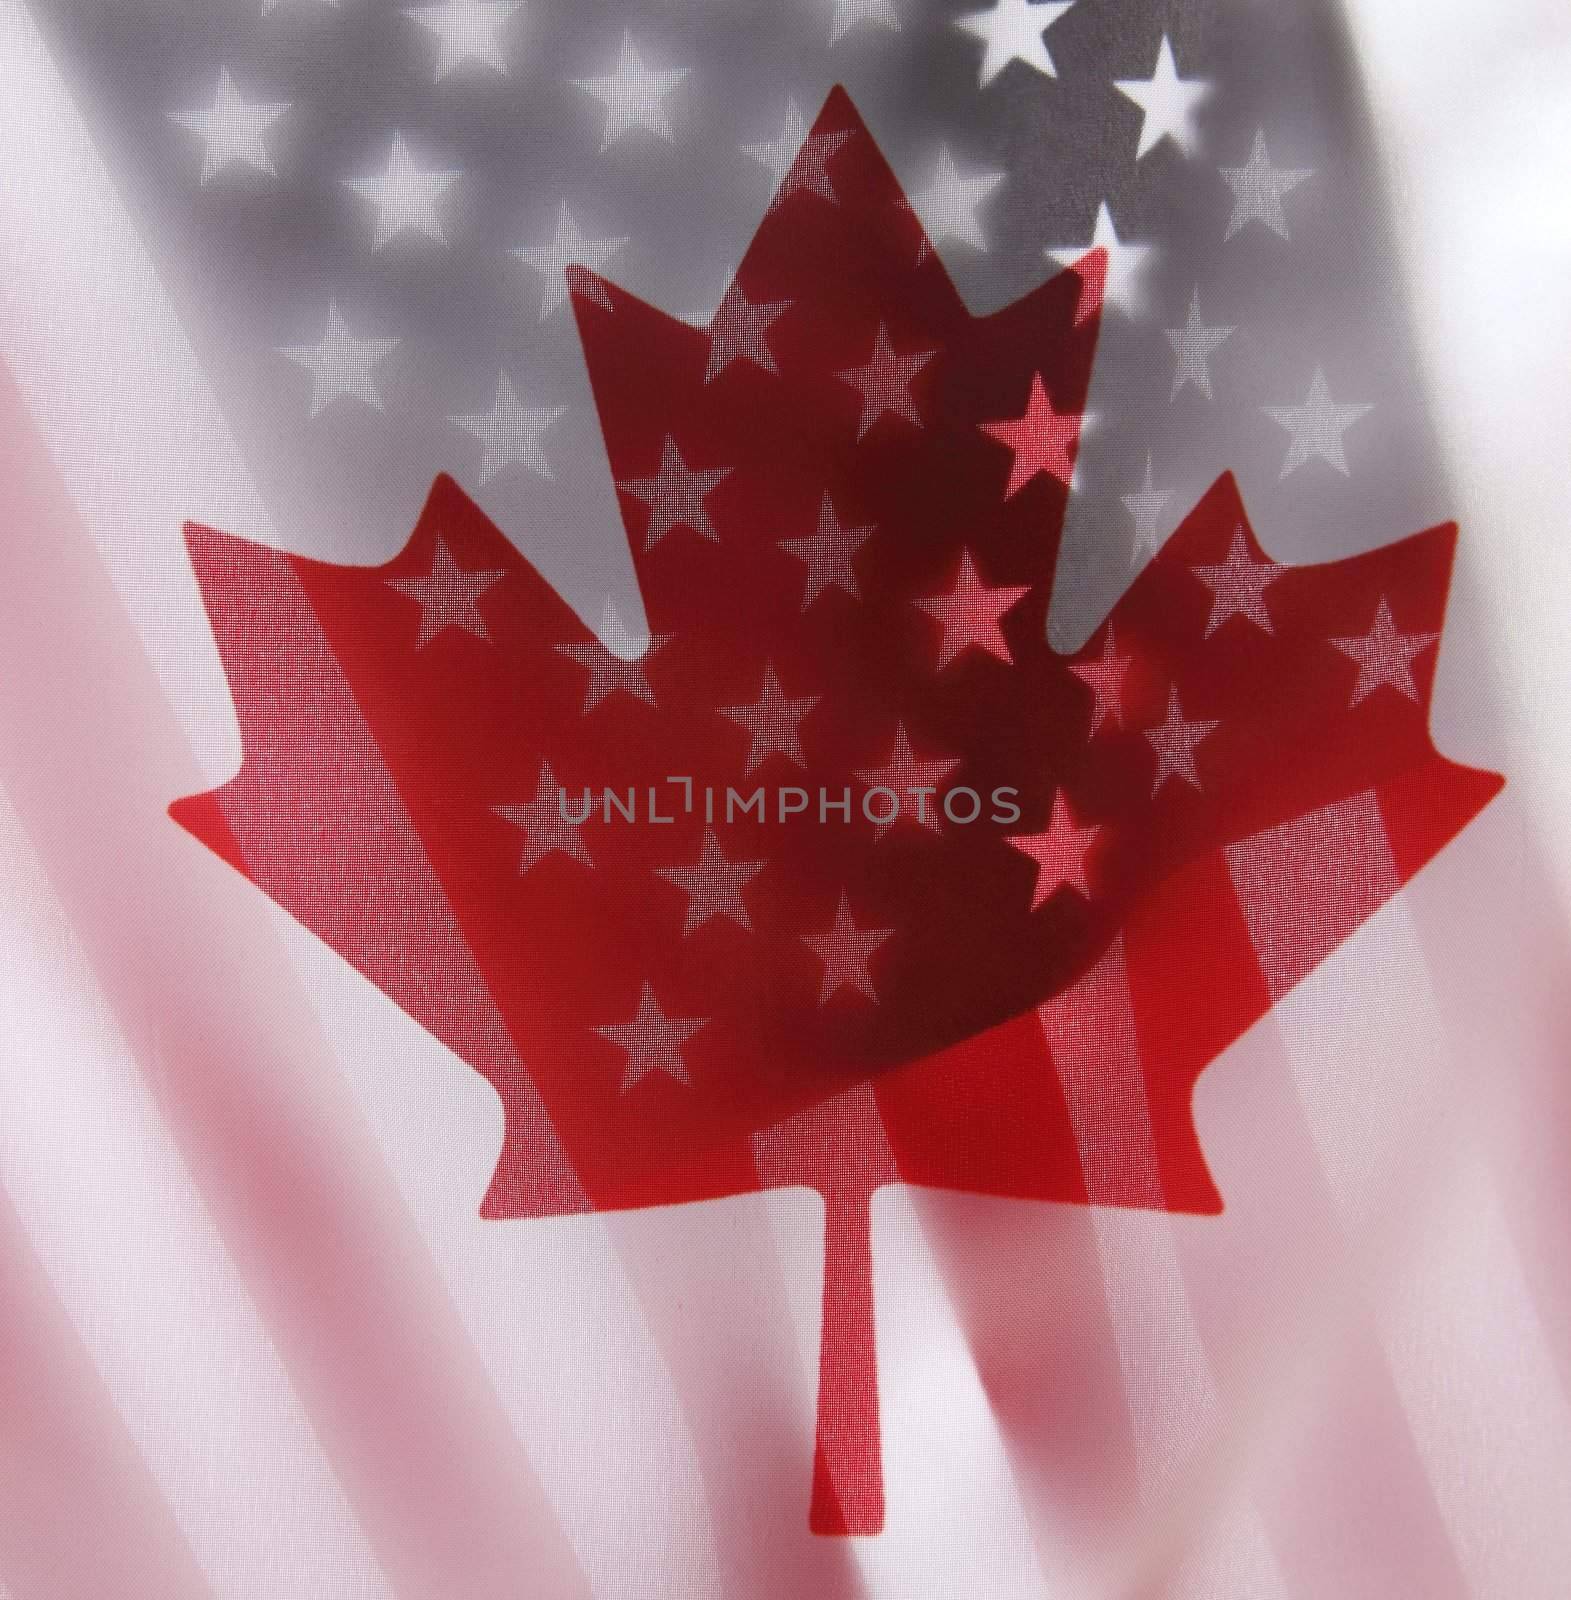 United States and Canada flags by nebari